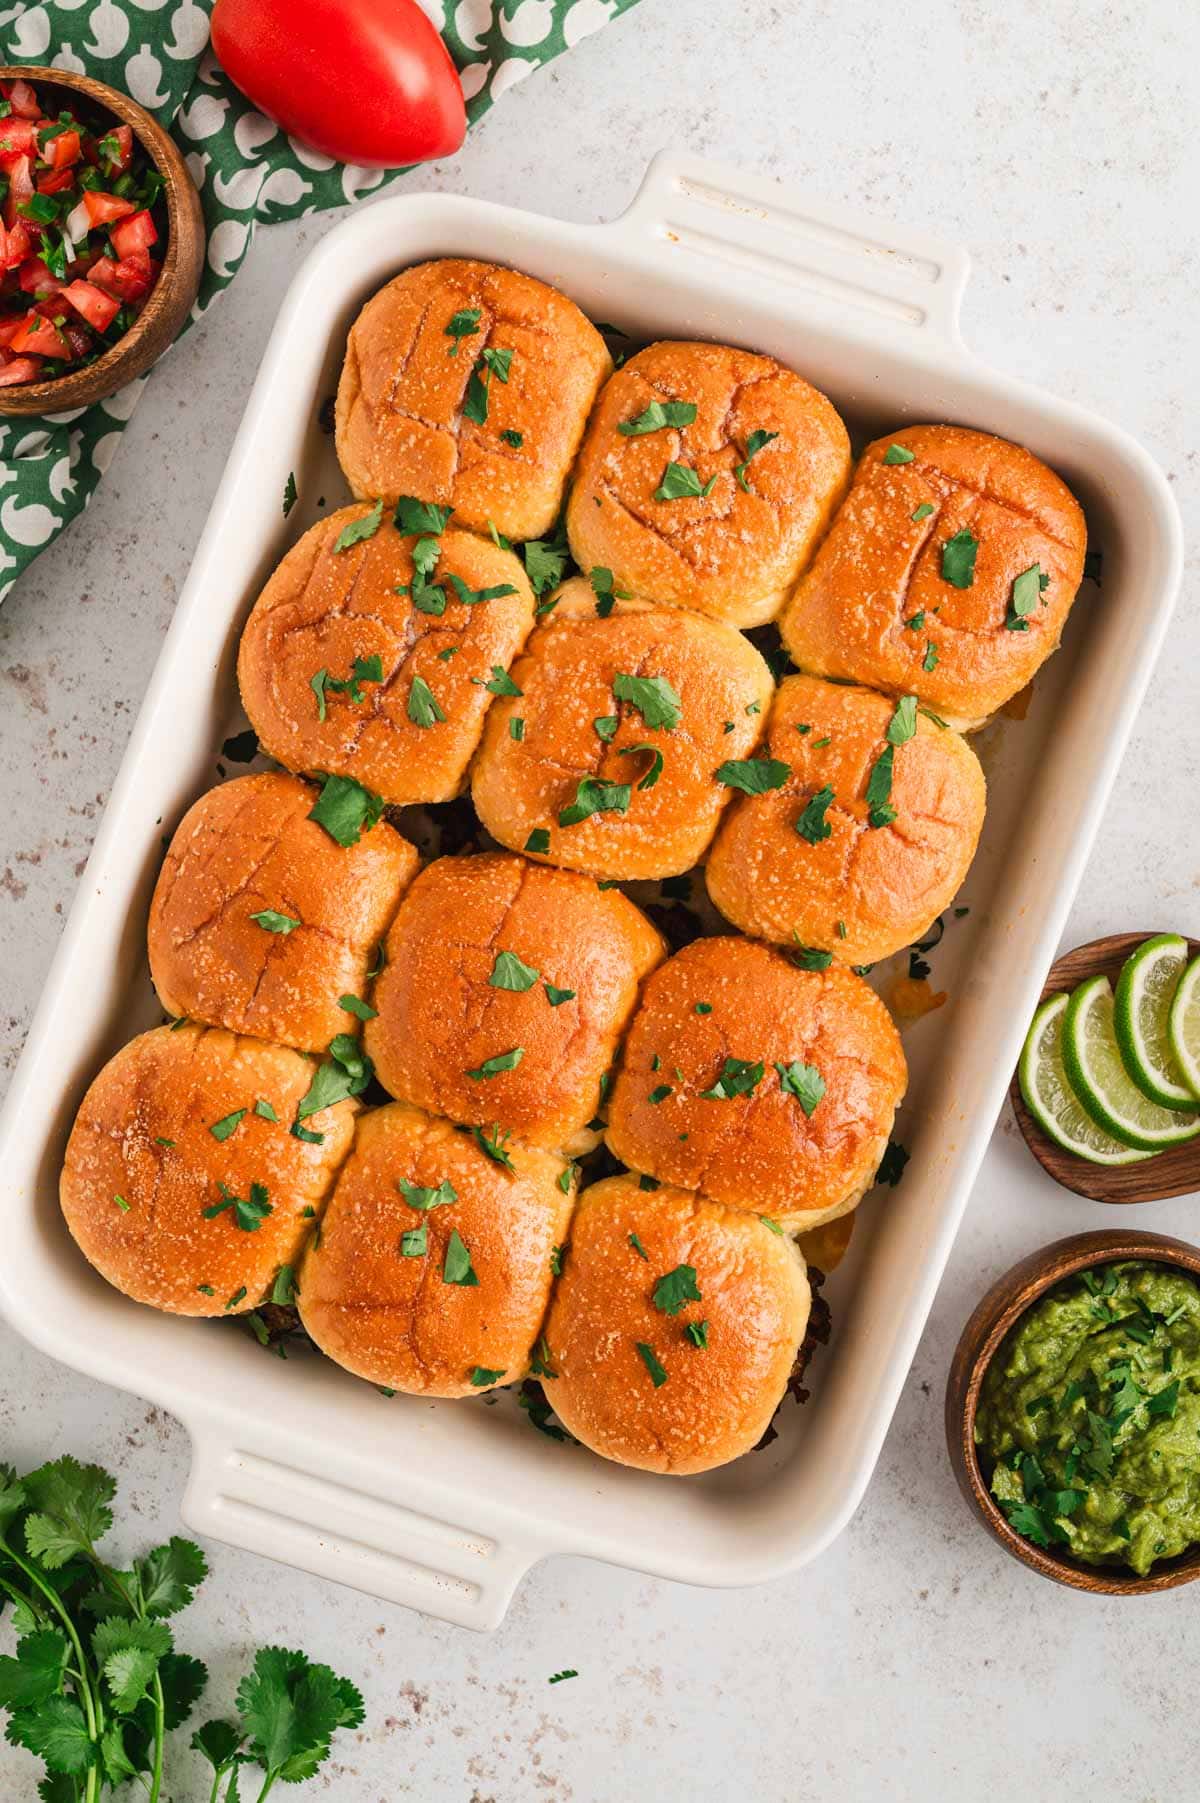 Sliders in a white baking dish topped with chopped cilantro.